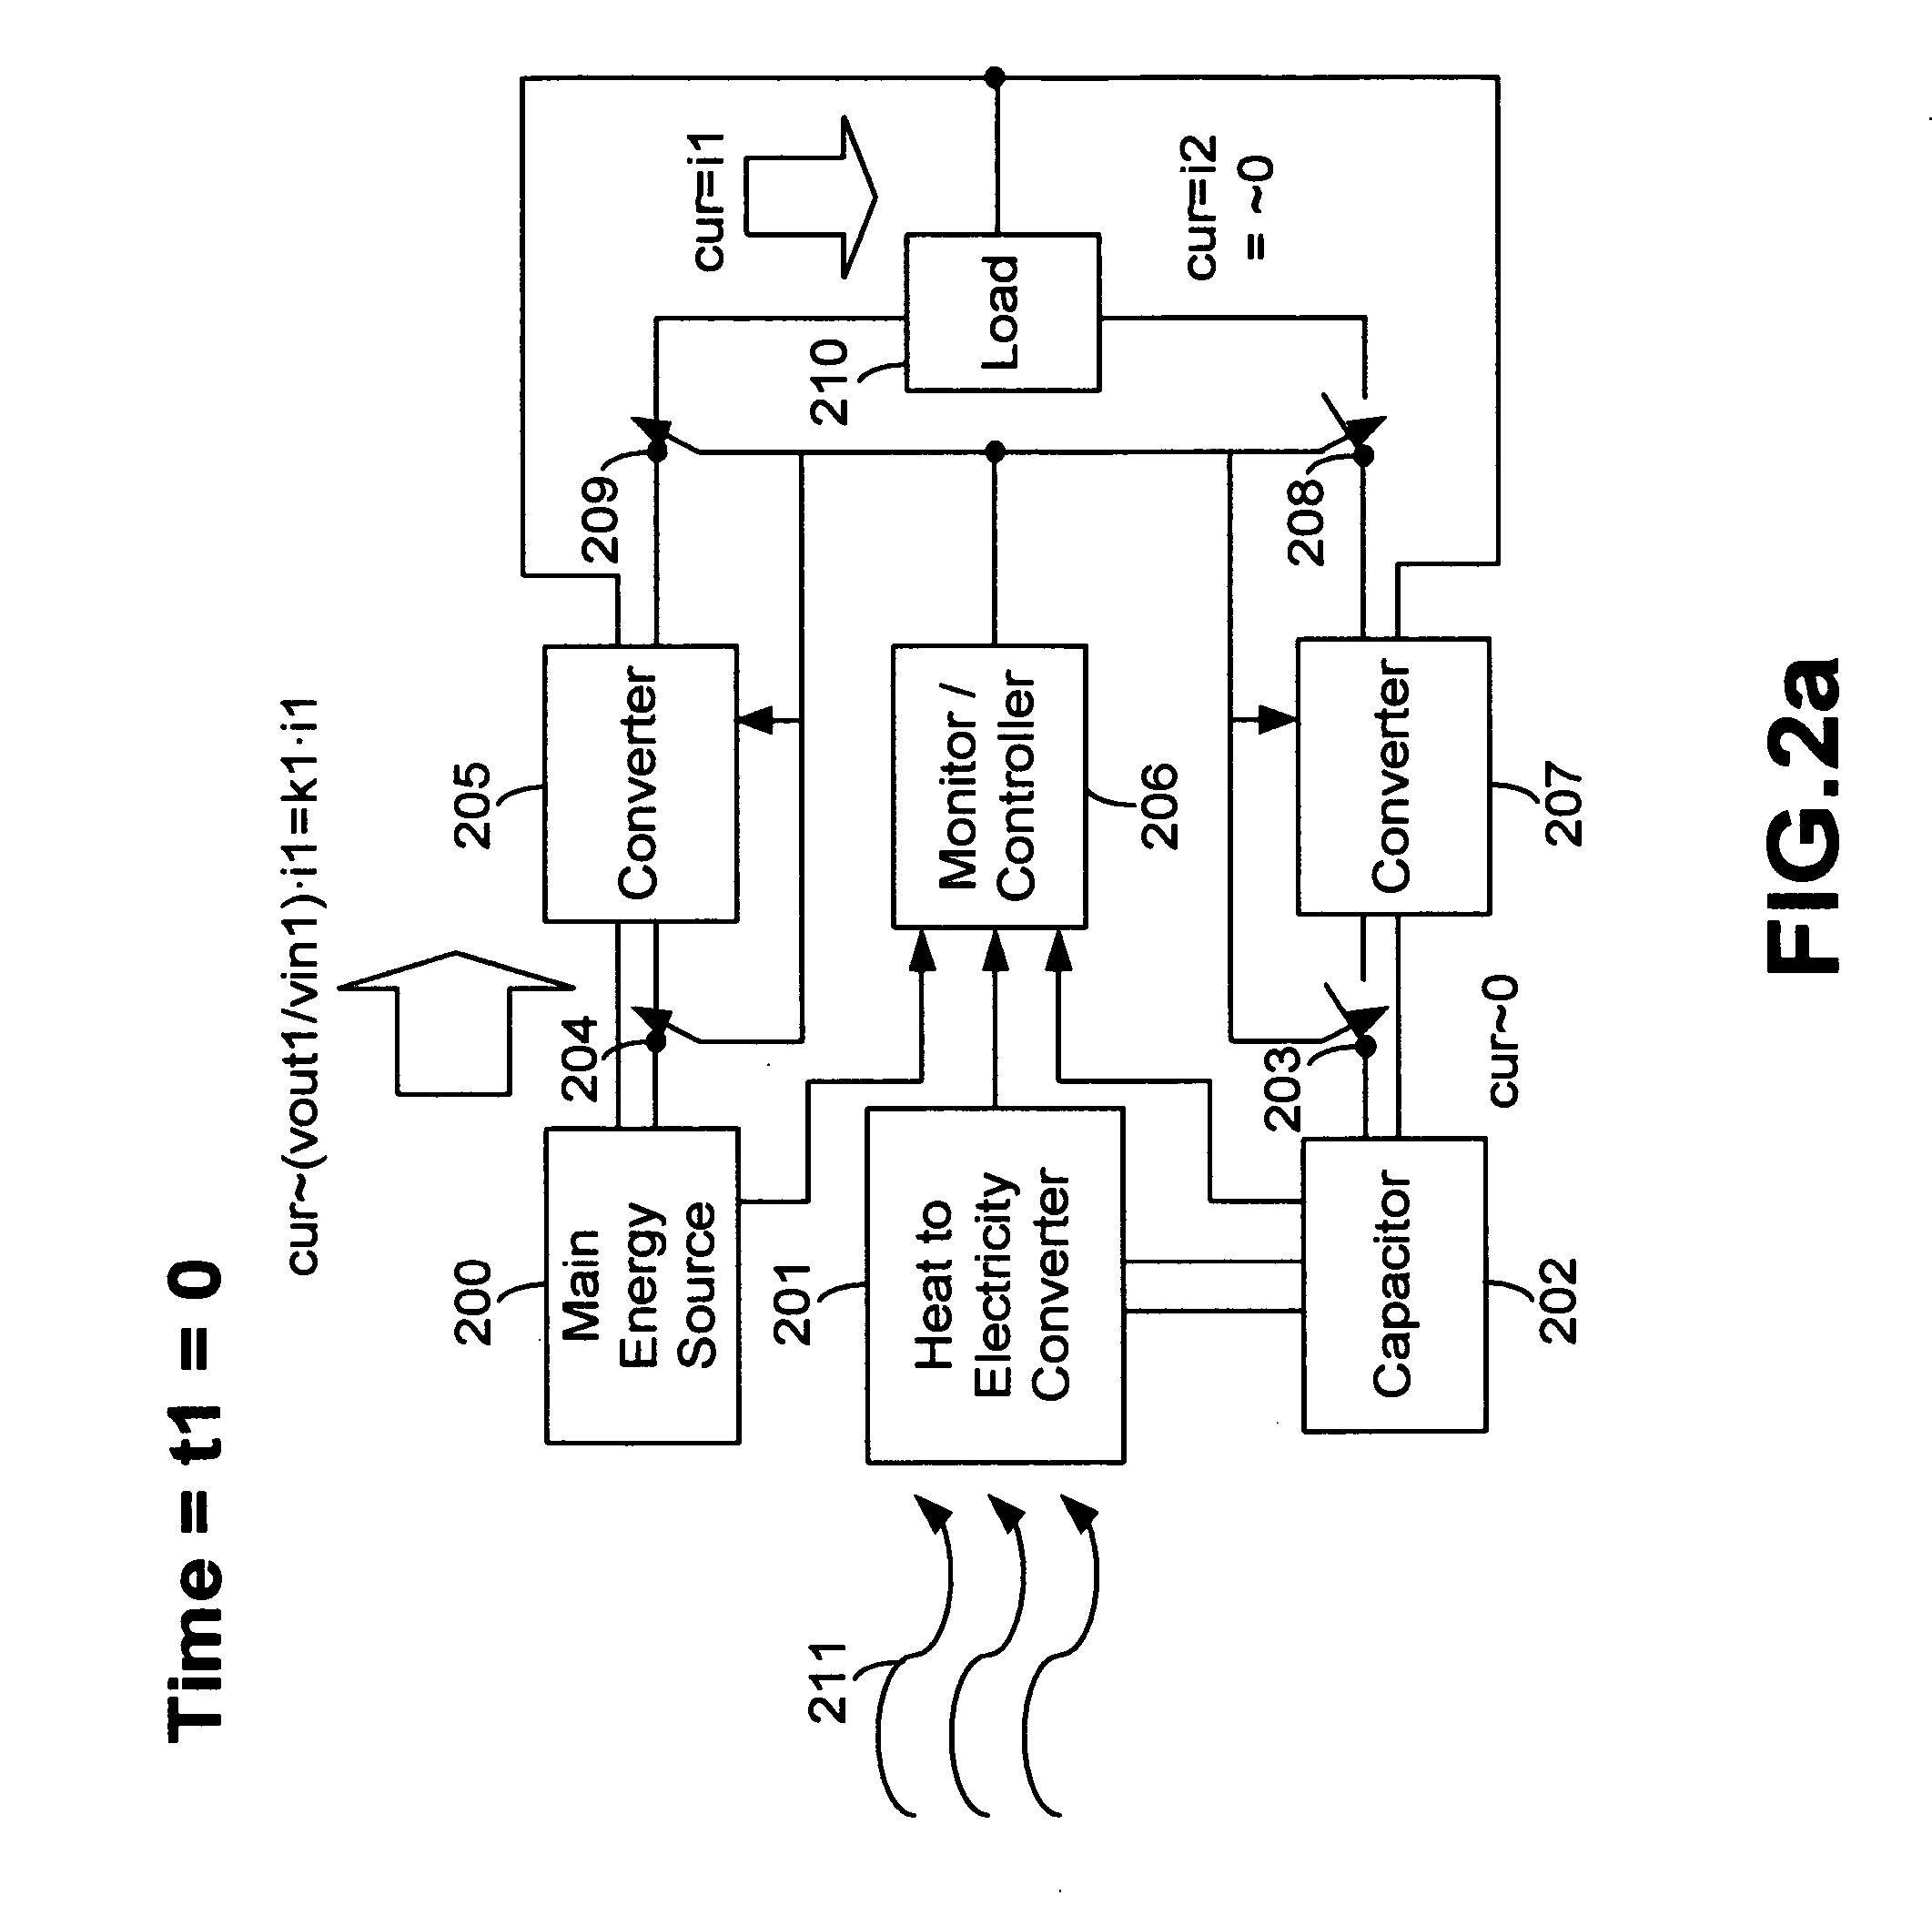 System and method for efficient power utilization and extension of battery life